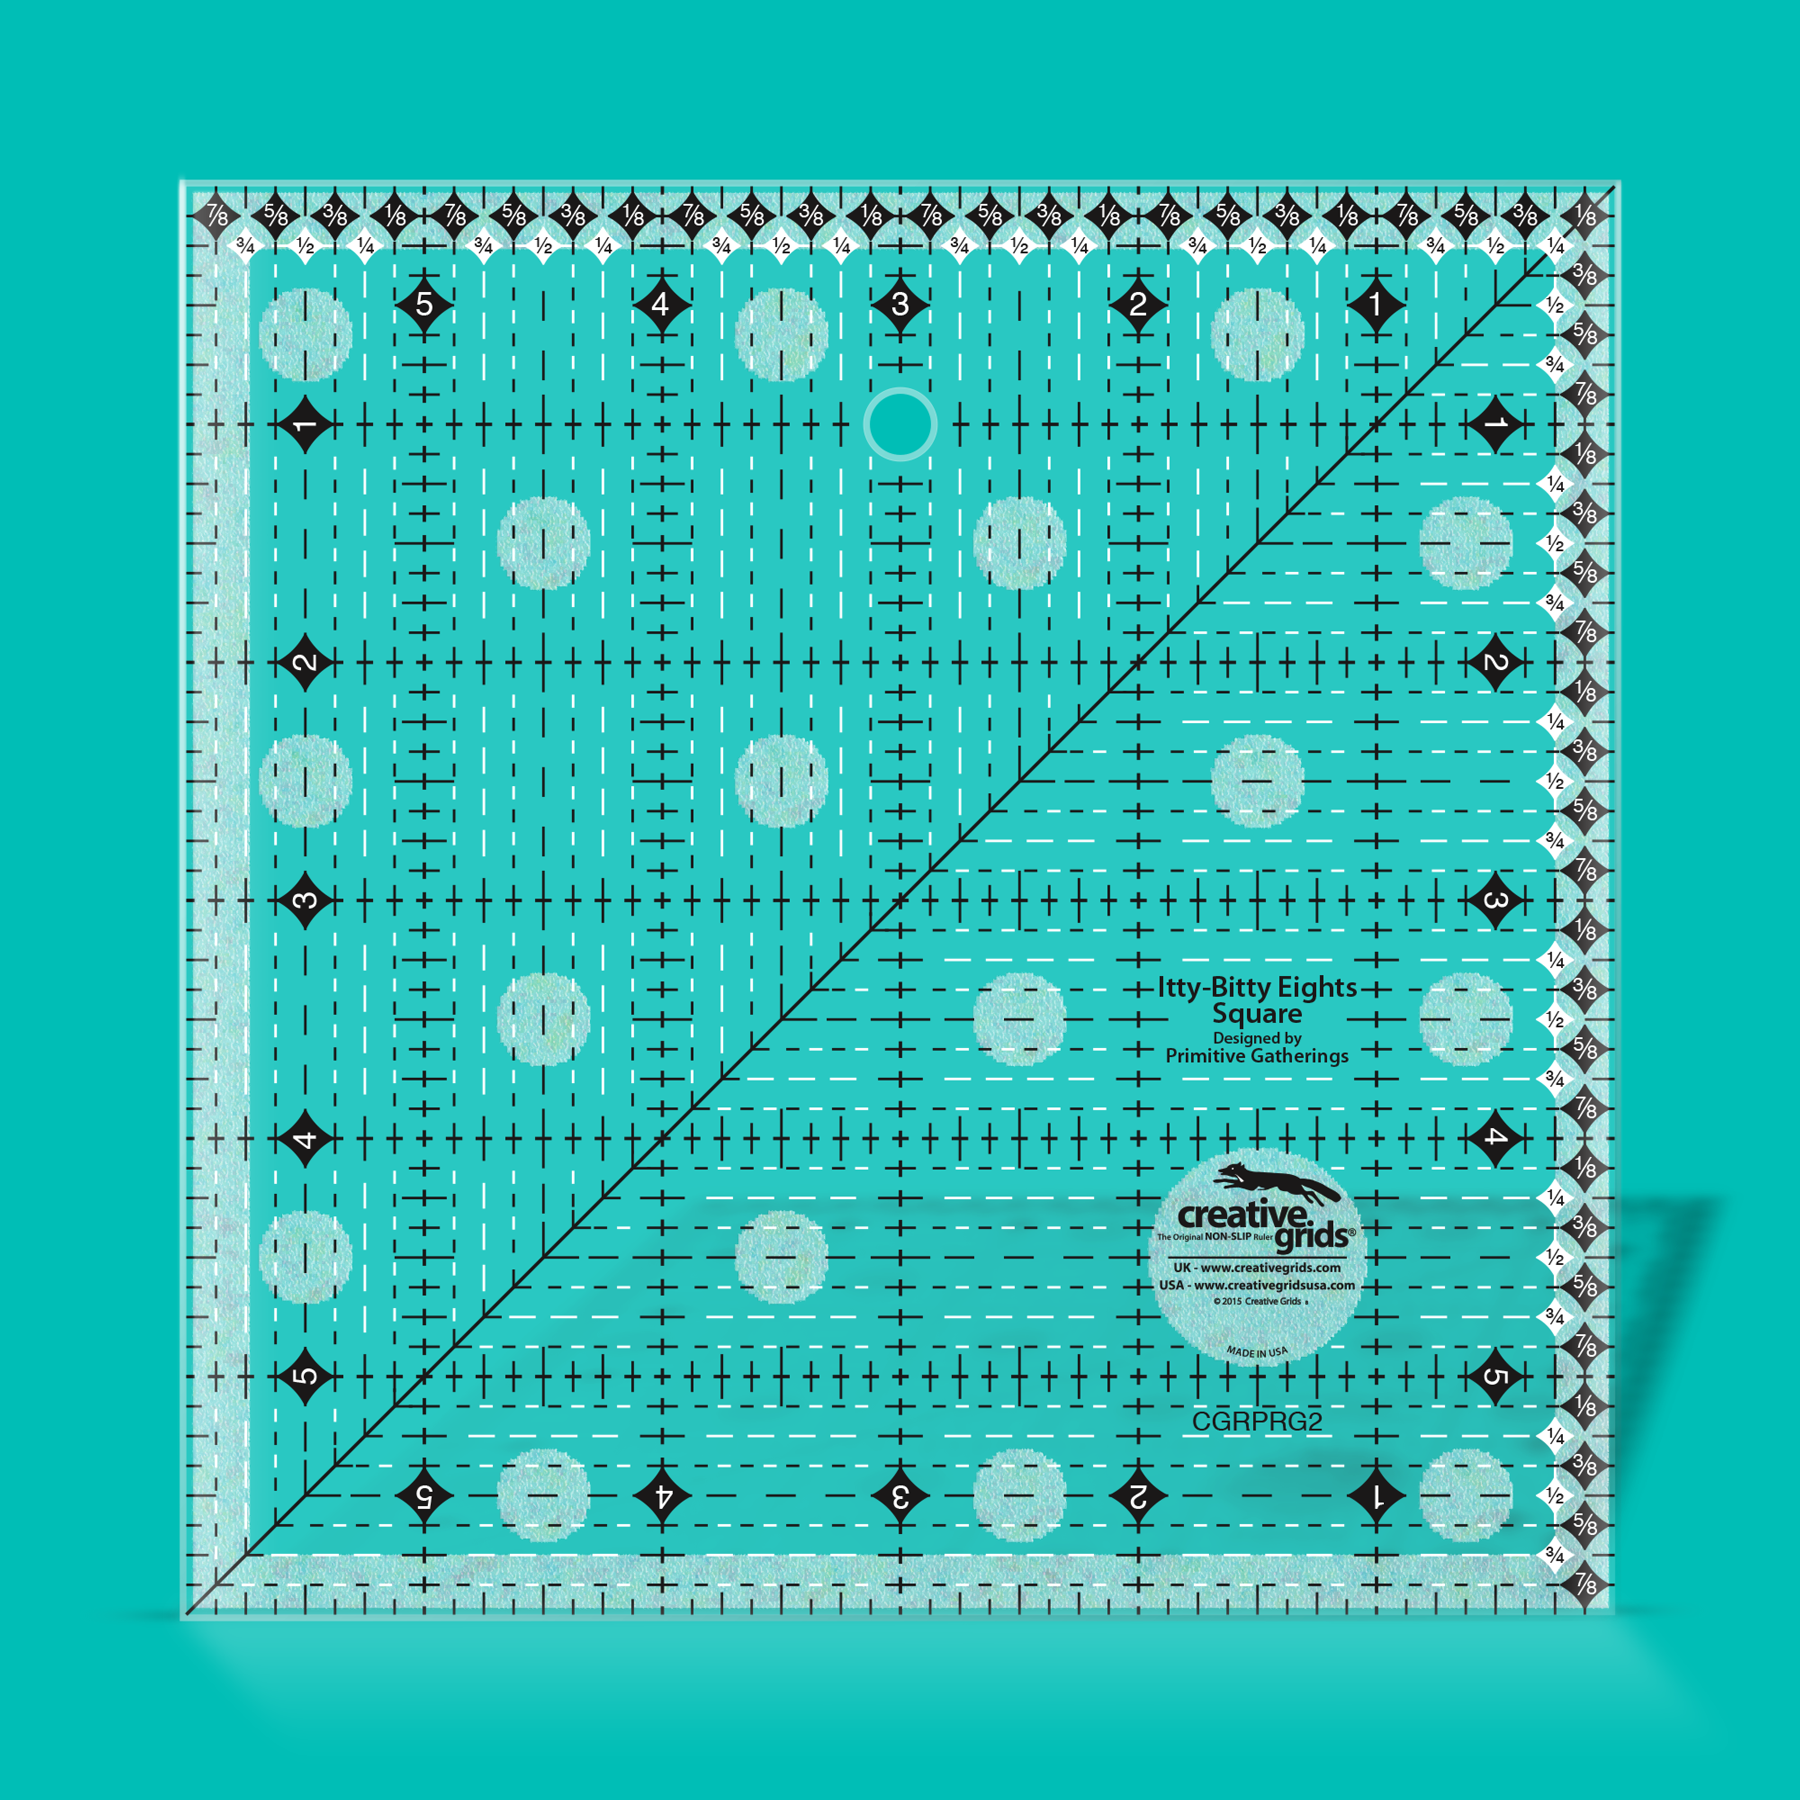 Creative Grids Itty Bitty Eights 6 Square Quilting Ruler